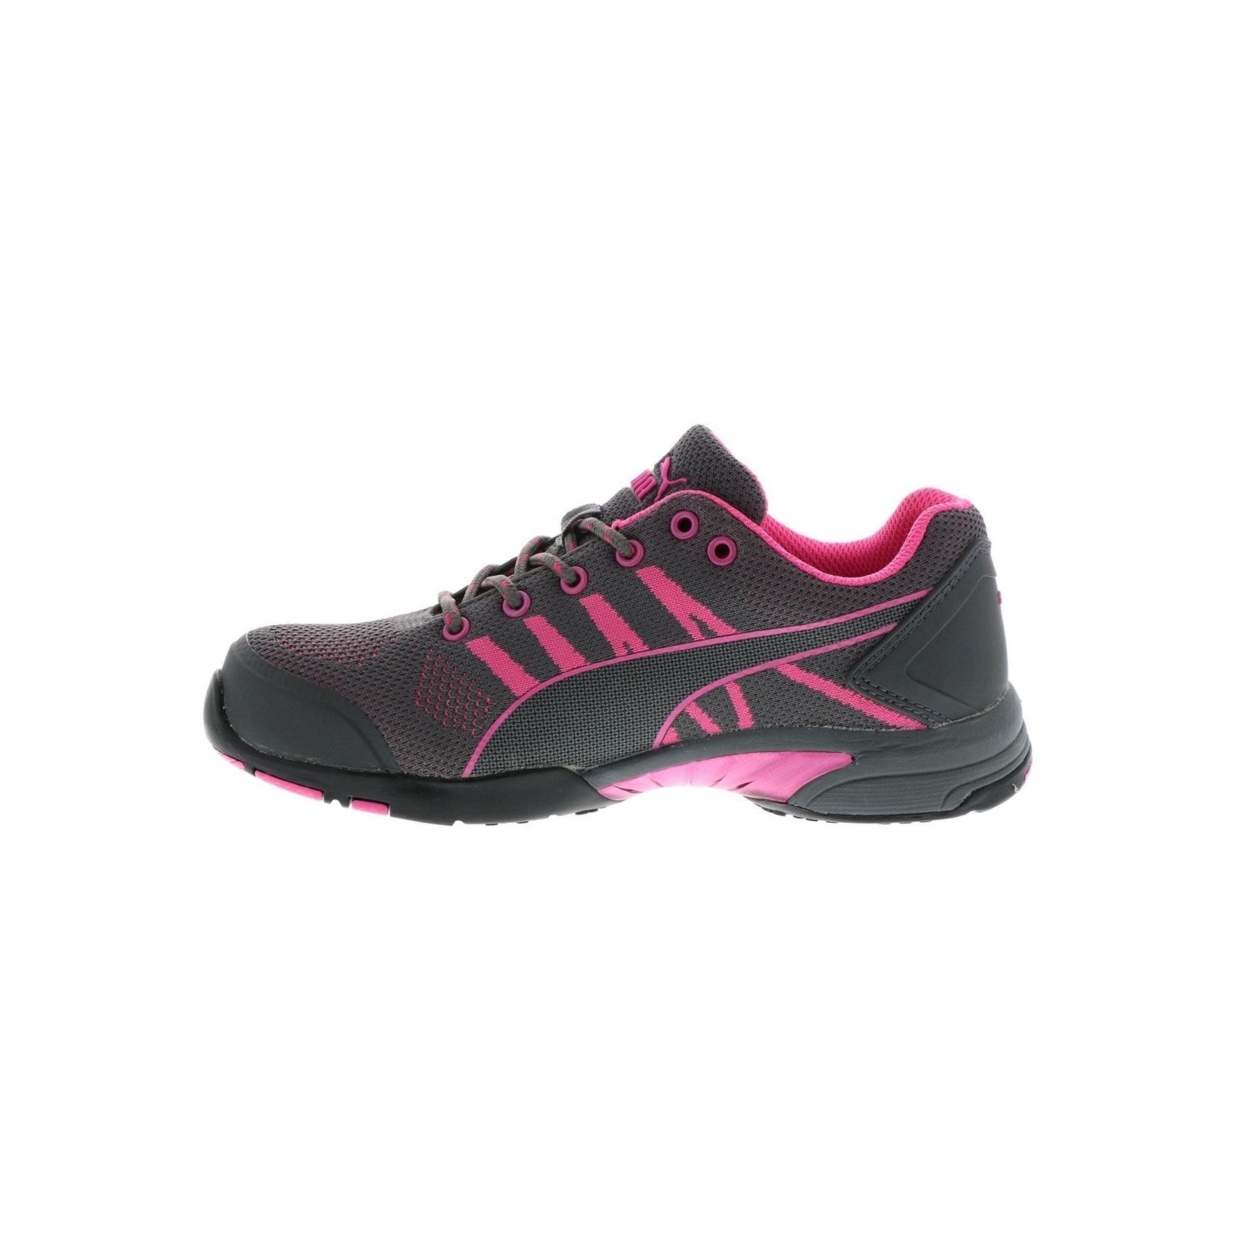 PUMA Safety Women's Celerity Knit Low Steel Toe ESD Work Shoe Pink - 642915 ONE SIZE PINK - PINK, 8.5